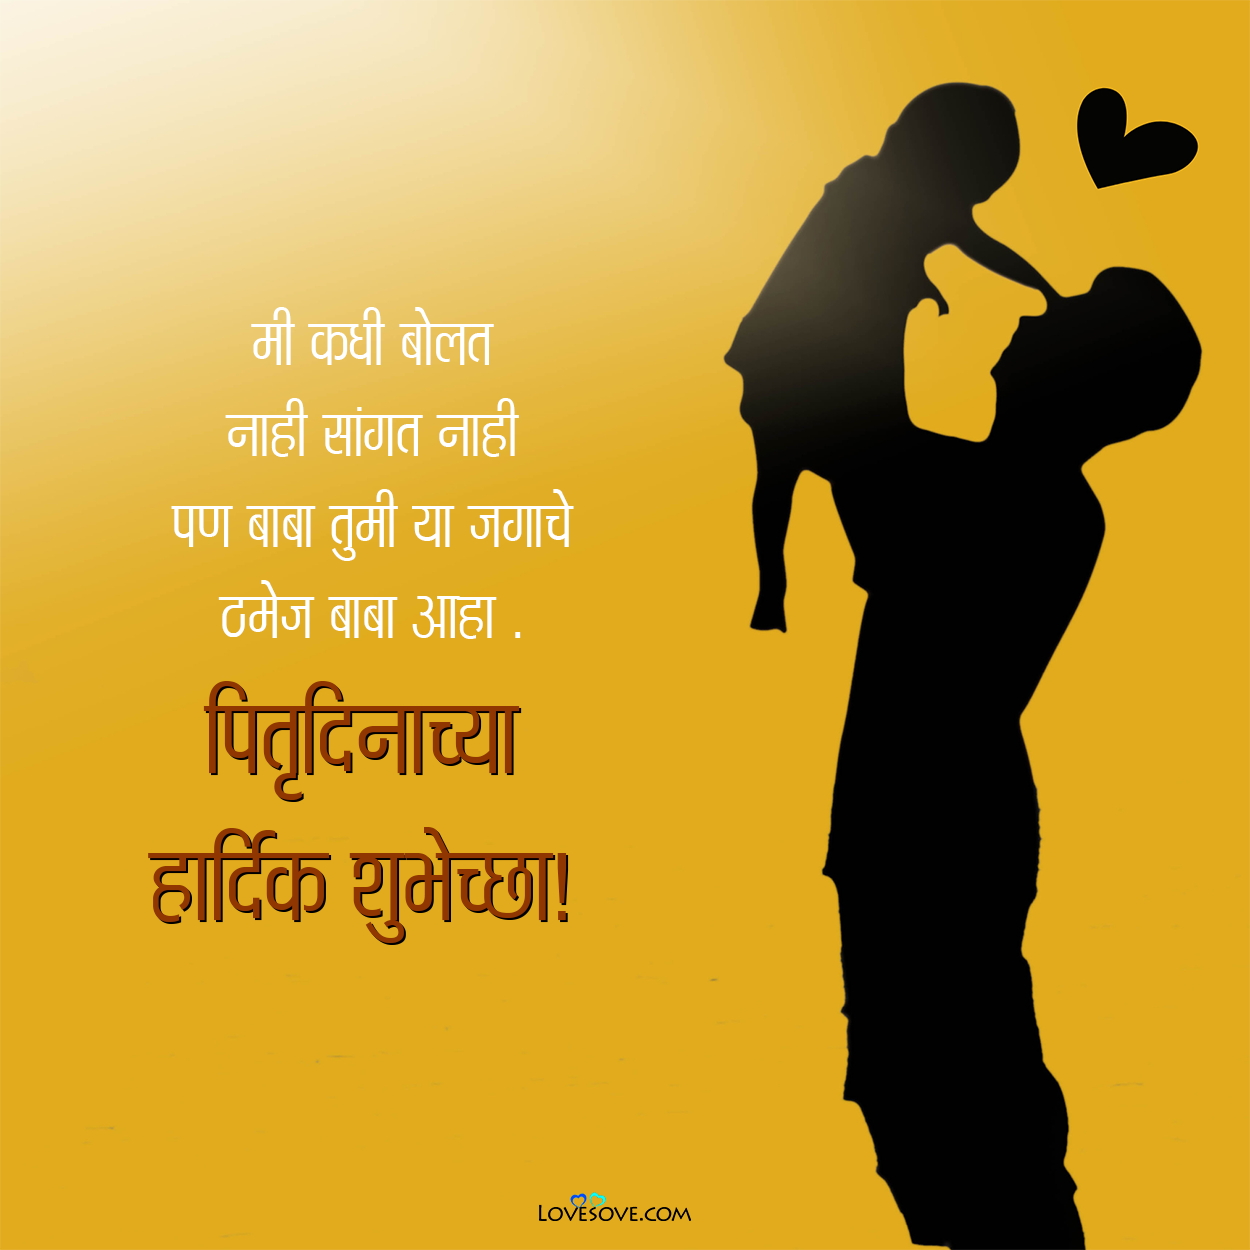 father's day marathi wishes, father's day marathi quotes